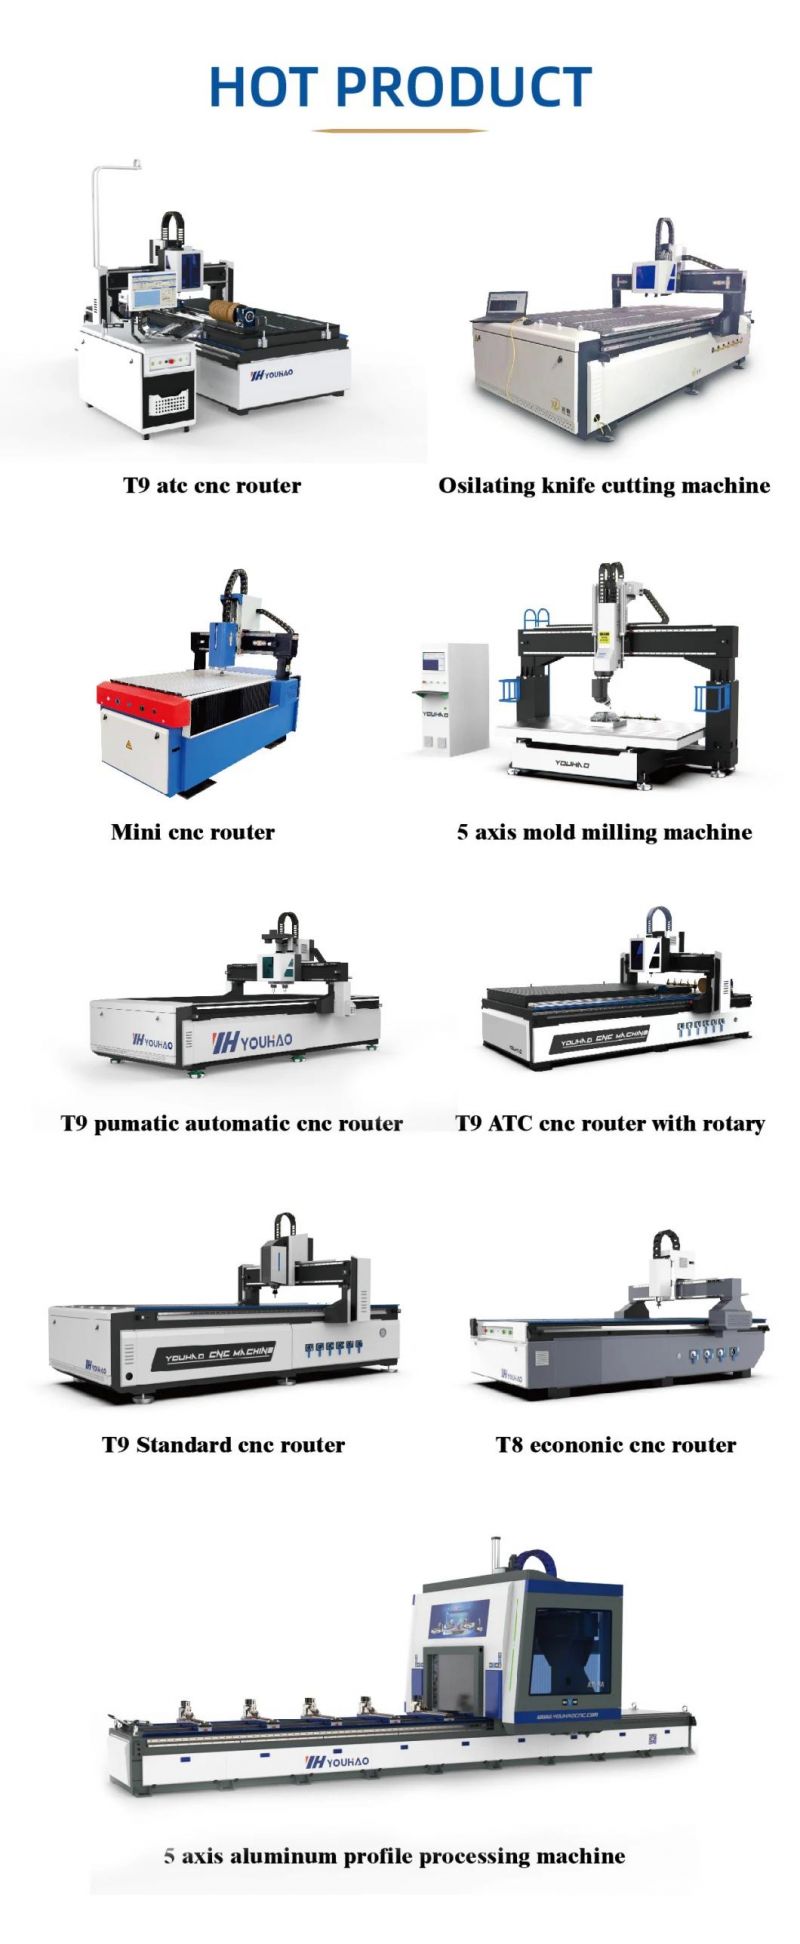 A9-1200 4 Axis CNC Router Engraver Machine Carving Wood Woodworking CNC Wood Machine